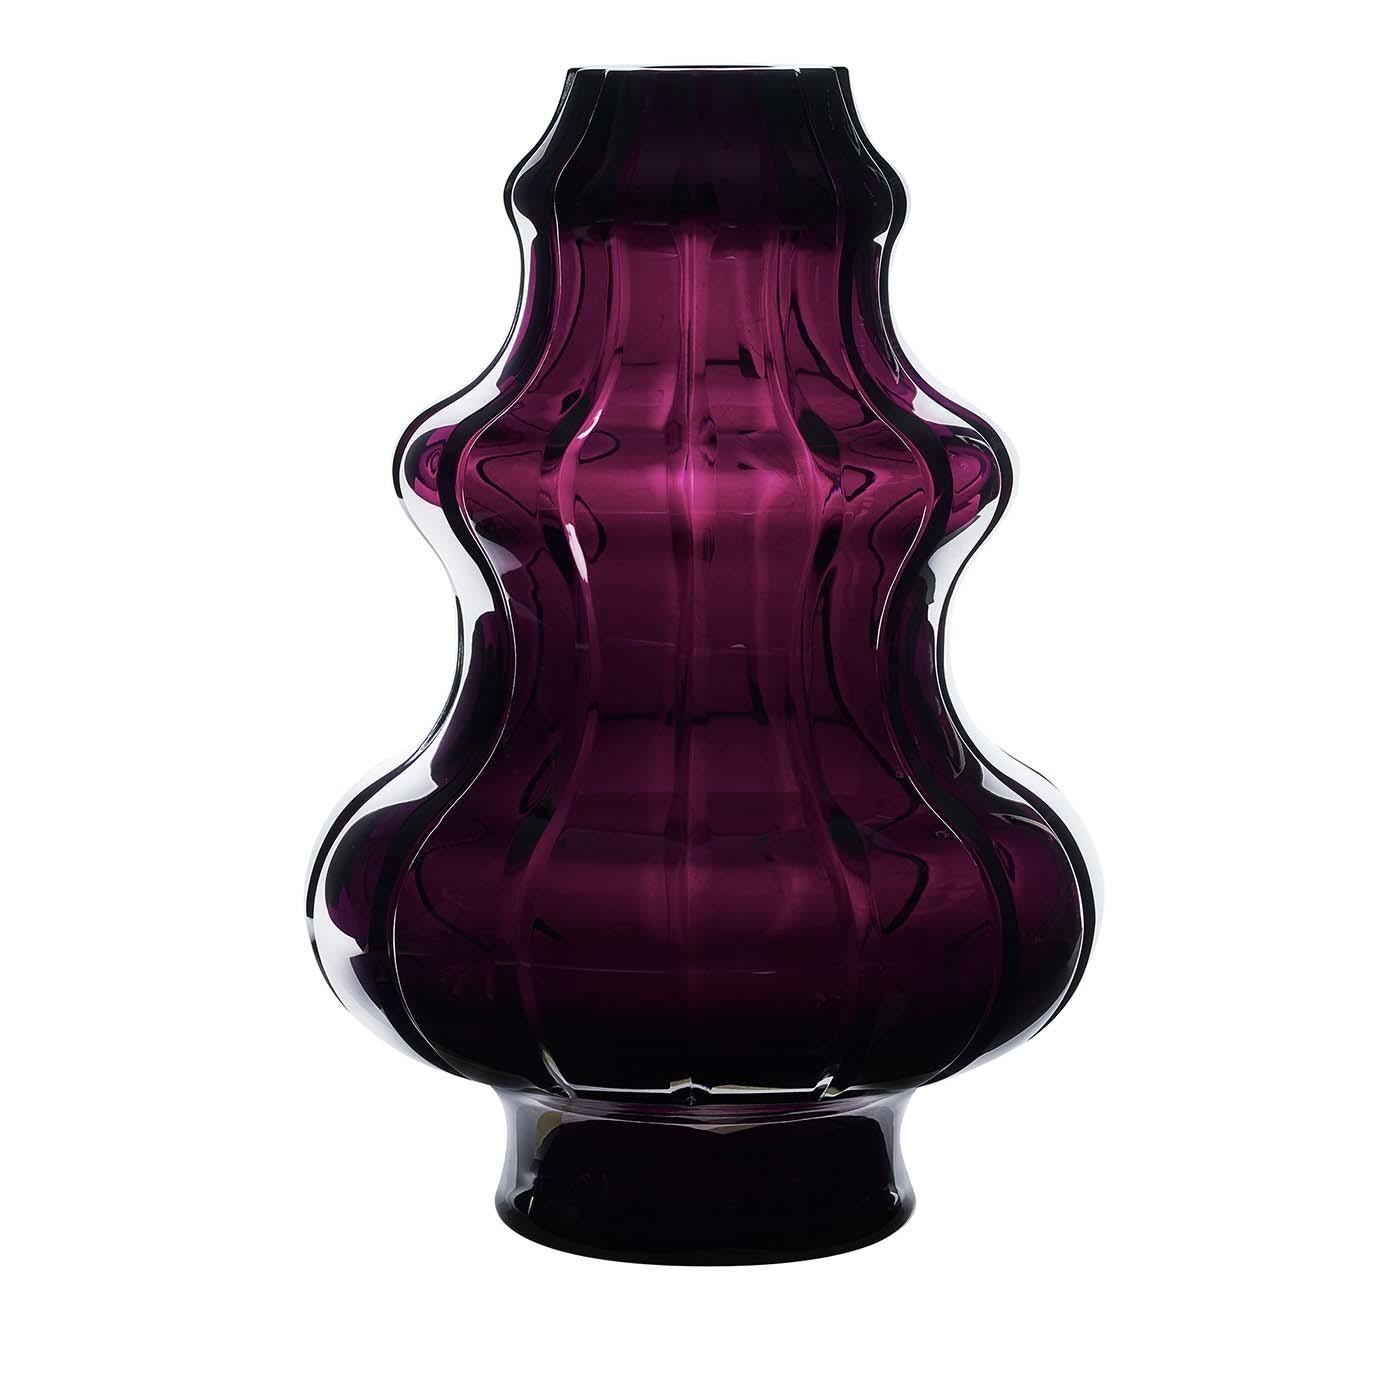 A splendid addition to a Classic living room, eclectic entryway, or modern study, this stunning vase was crafted of crystal in a sublime amethyst color. The deep burgundy hue is enclosed in a layer of transparent crystal with vertical creases that